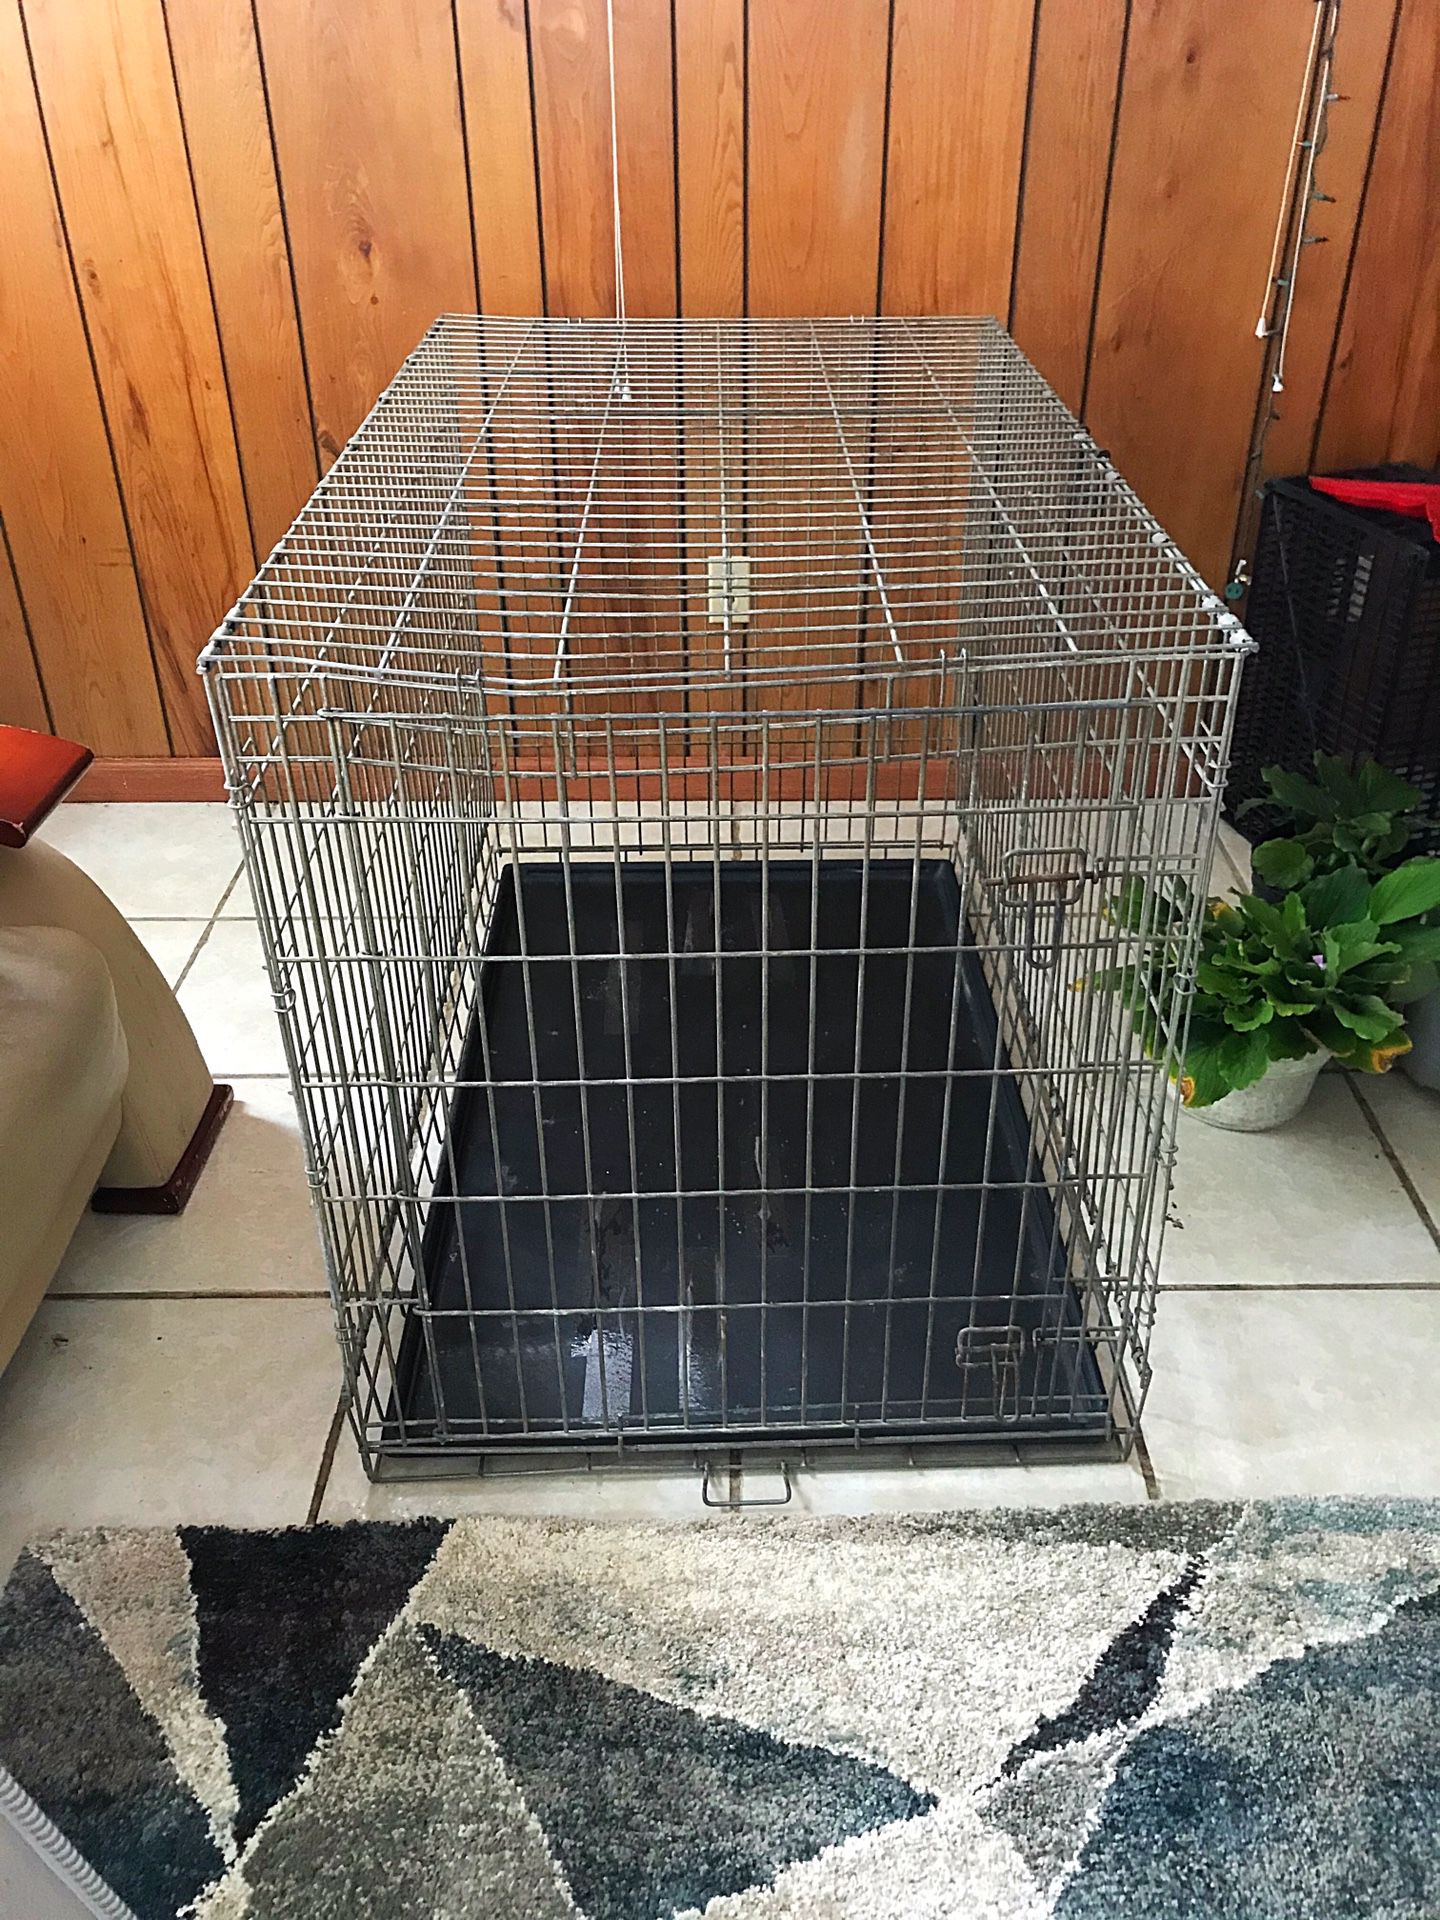 MIDWEST Homes for Pets, XL wire dog crate: 30” W X 35” H X 48” L